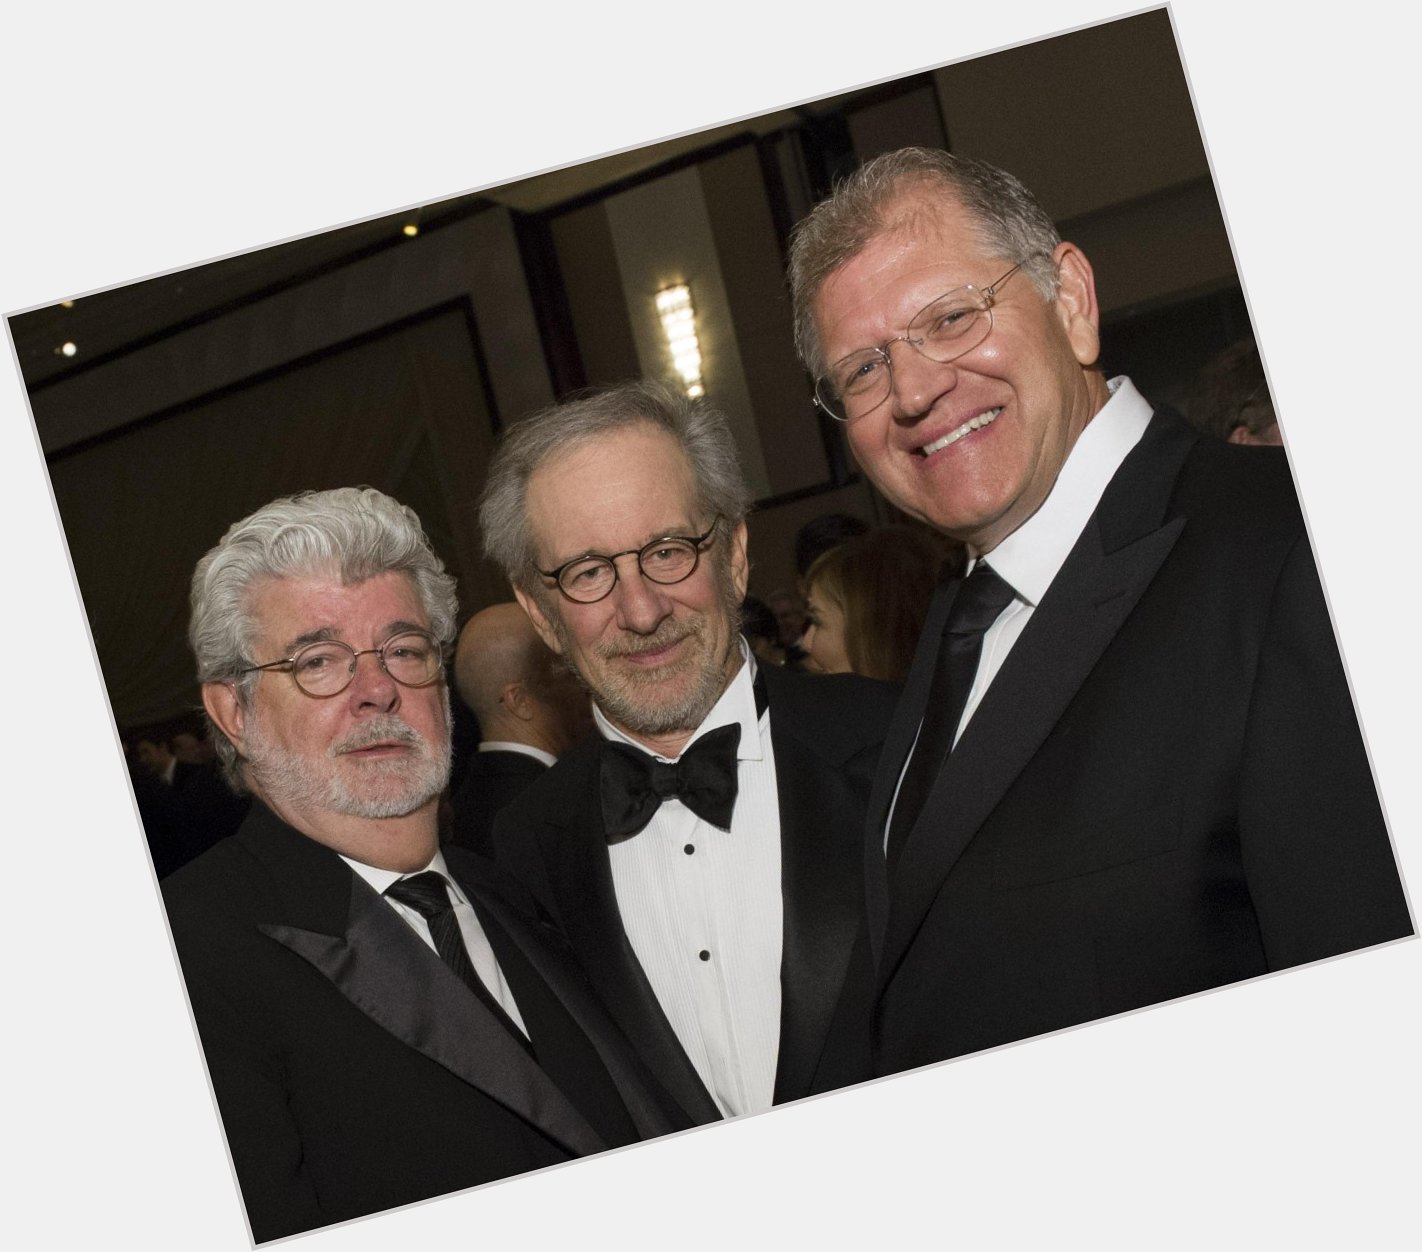  Happy Birthday to both George Lucas & Robert Zemeckis! But not Spielberg. What a gooseberry. 